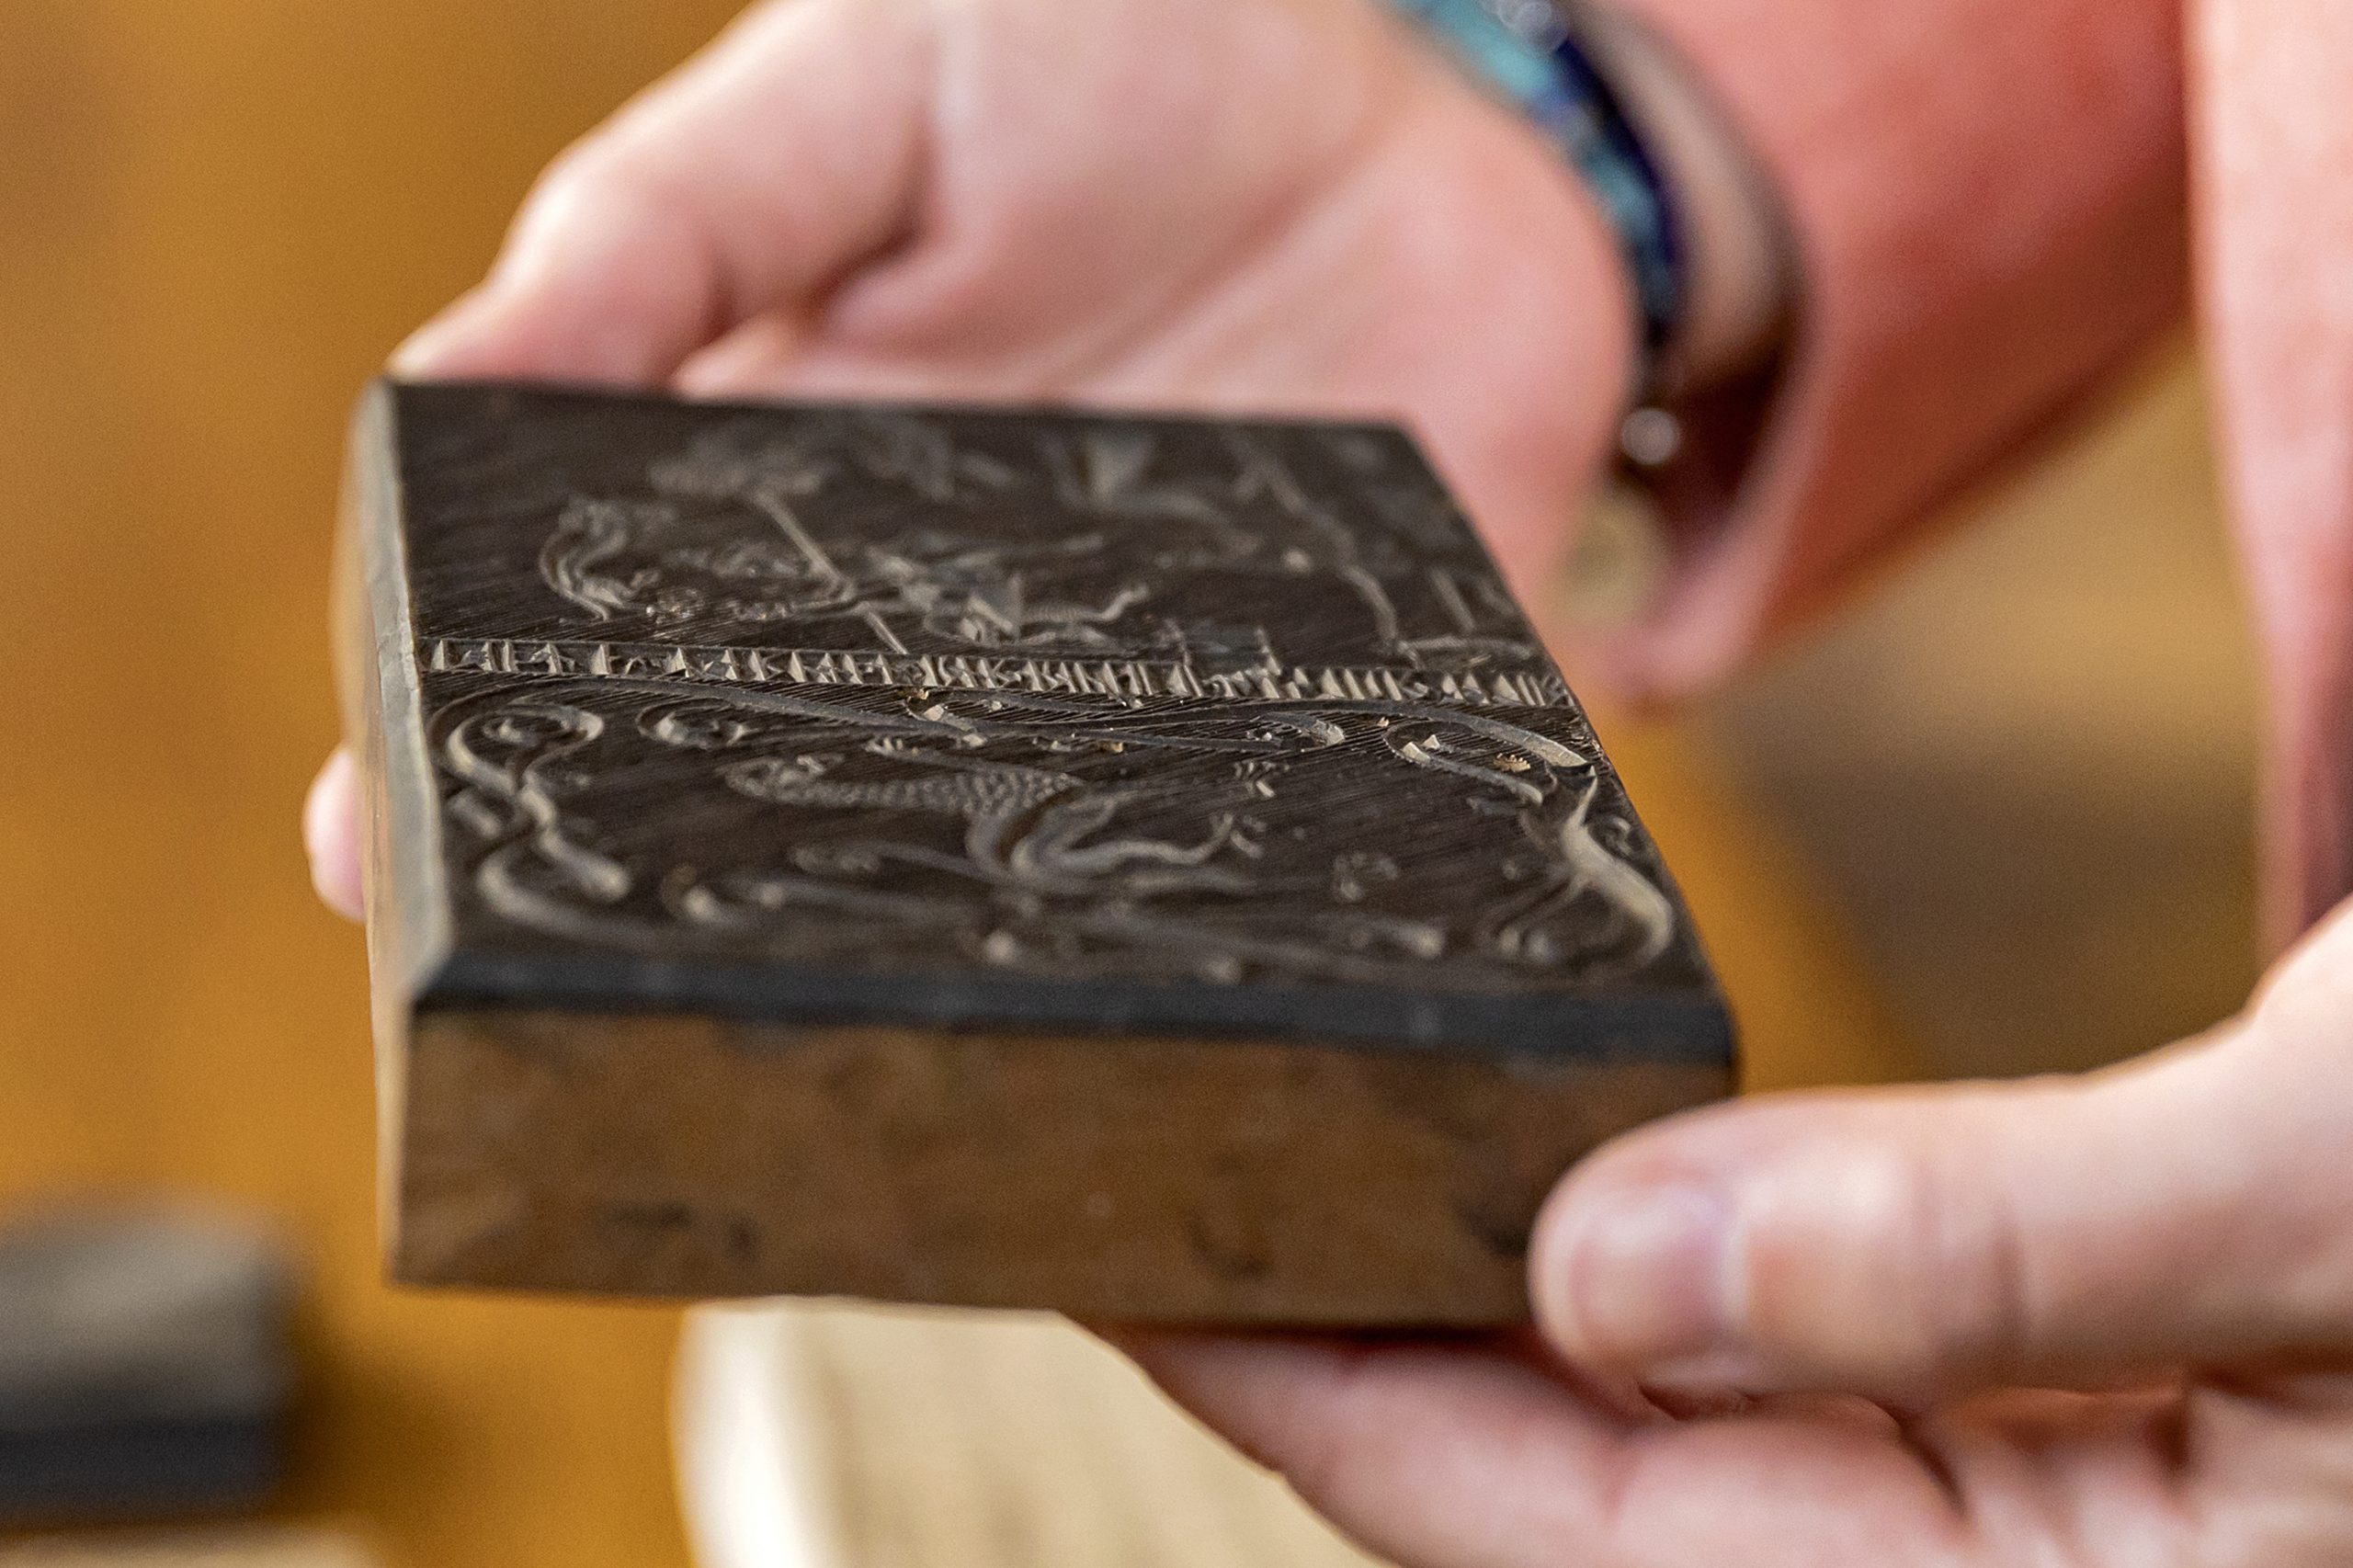 A detail shot of one of the woodcut printing blocks from the 9 millionth volume, 900 woodcut printing blocks